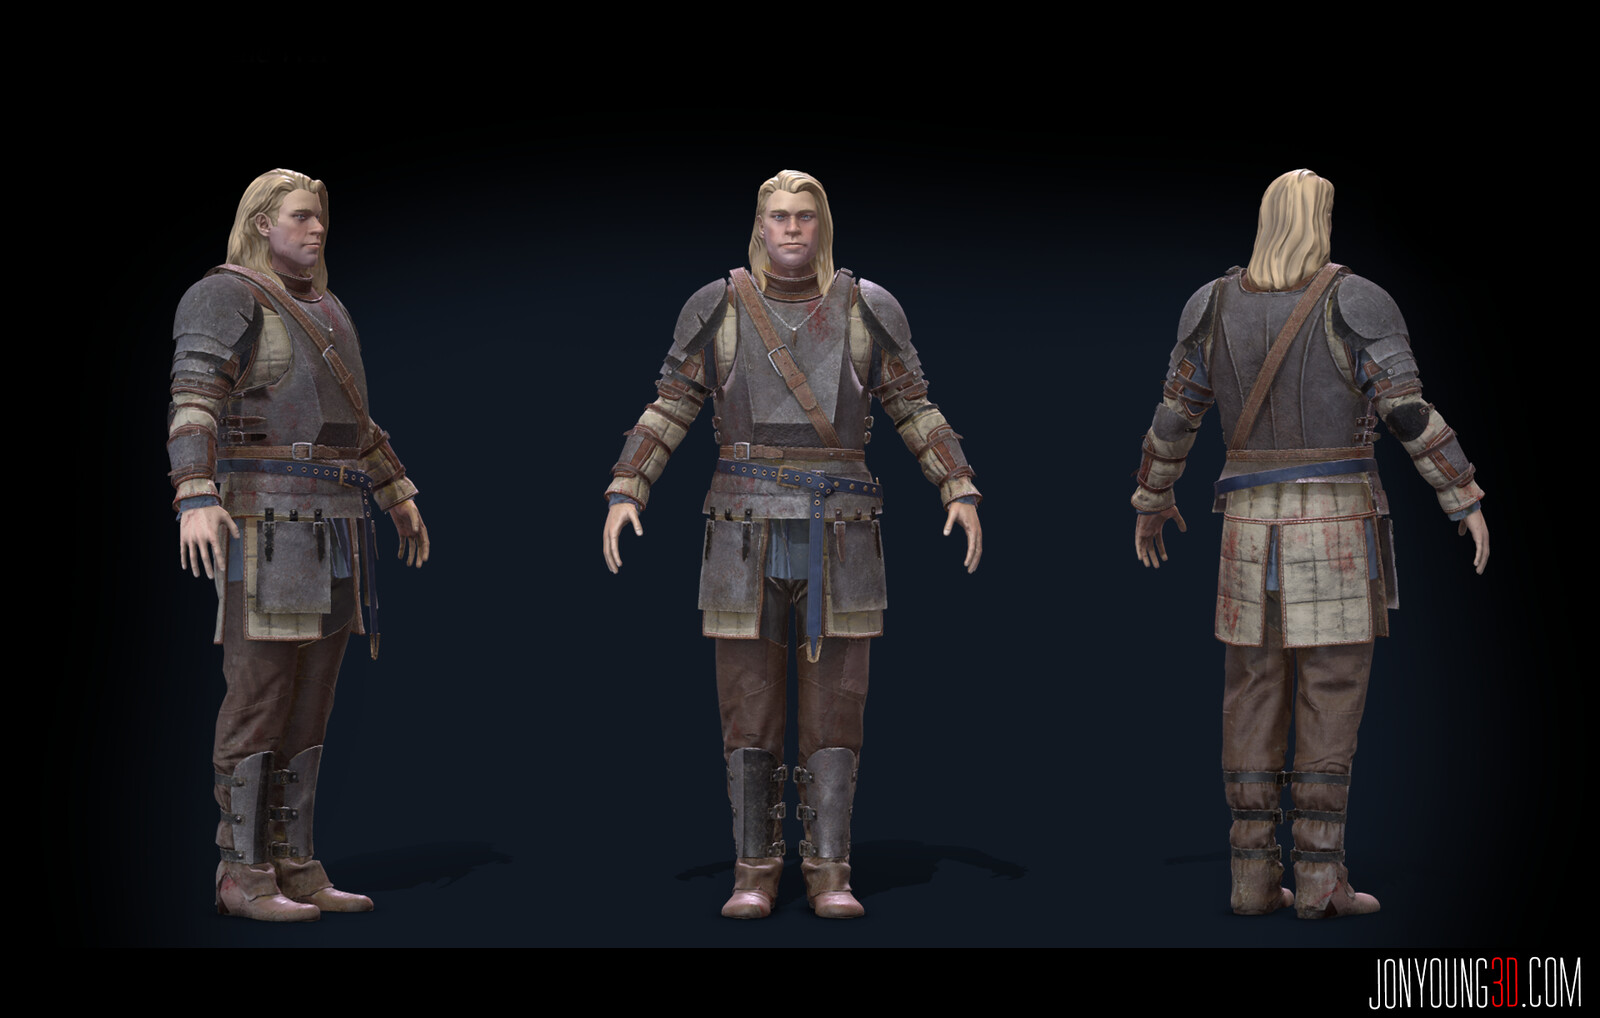 Real-time character WIP heavily inspired by Sir Duncan the Tall in G.R.R. Martin's "The Hedge Knight" series of books. Clothing created in Marvelous Designer. High poly sculpted in Zbrush.